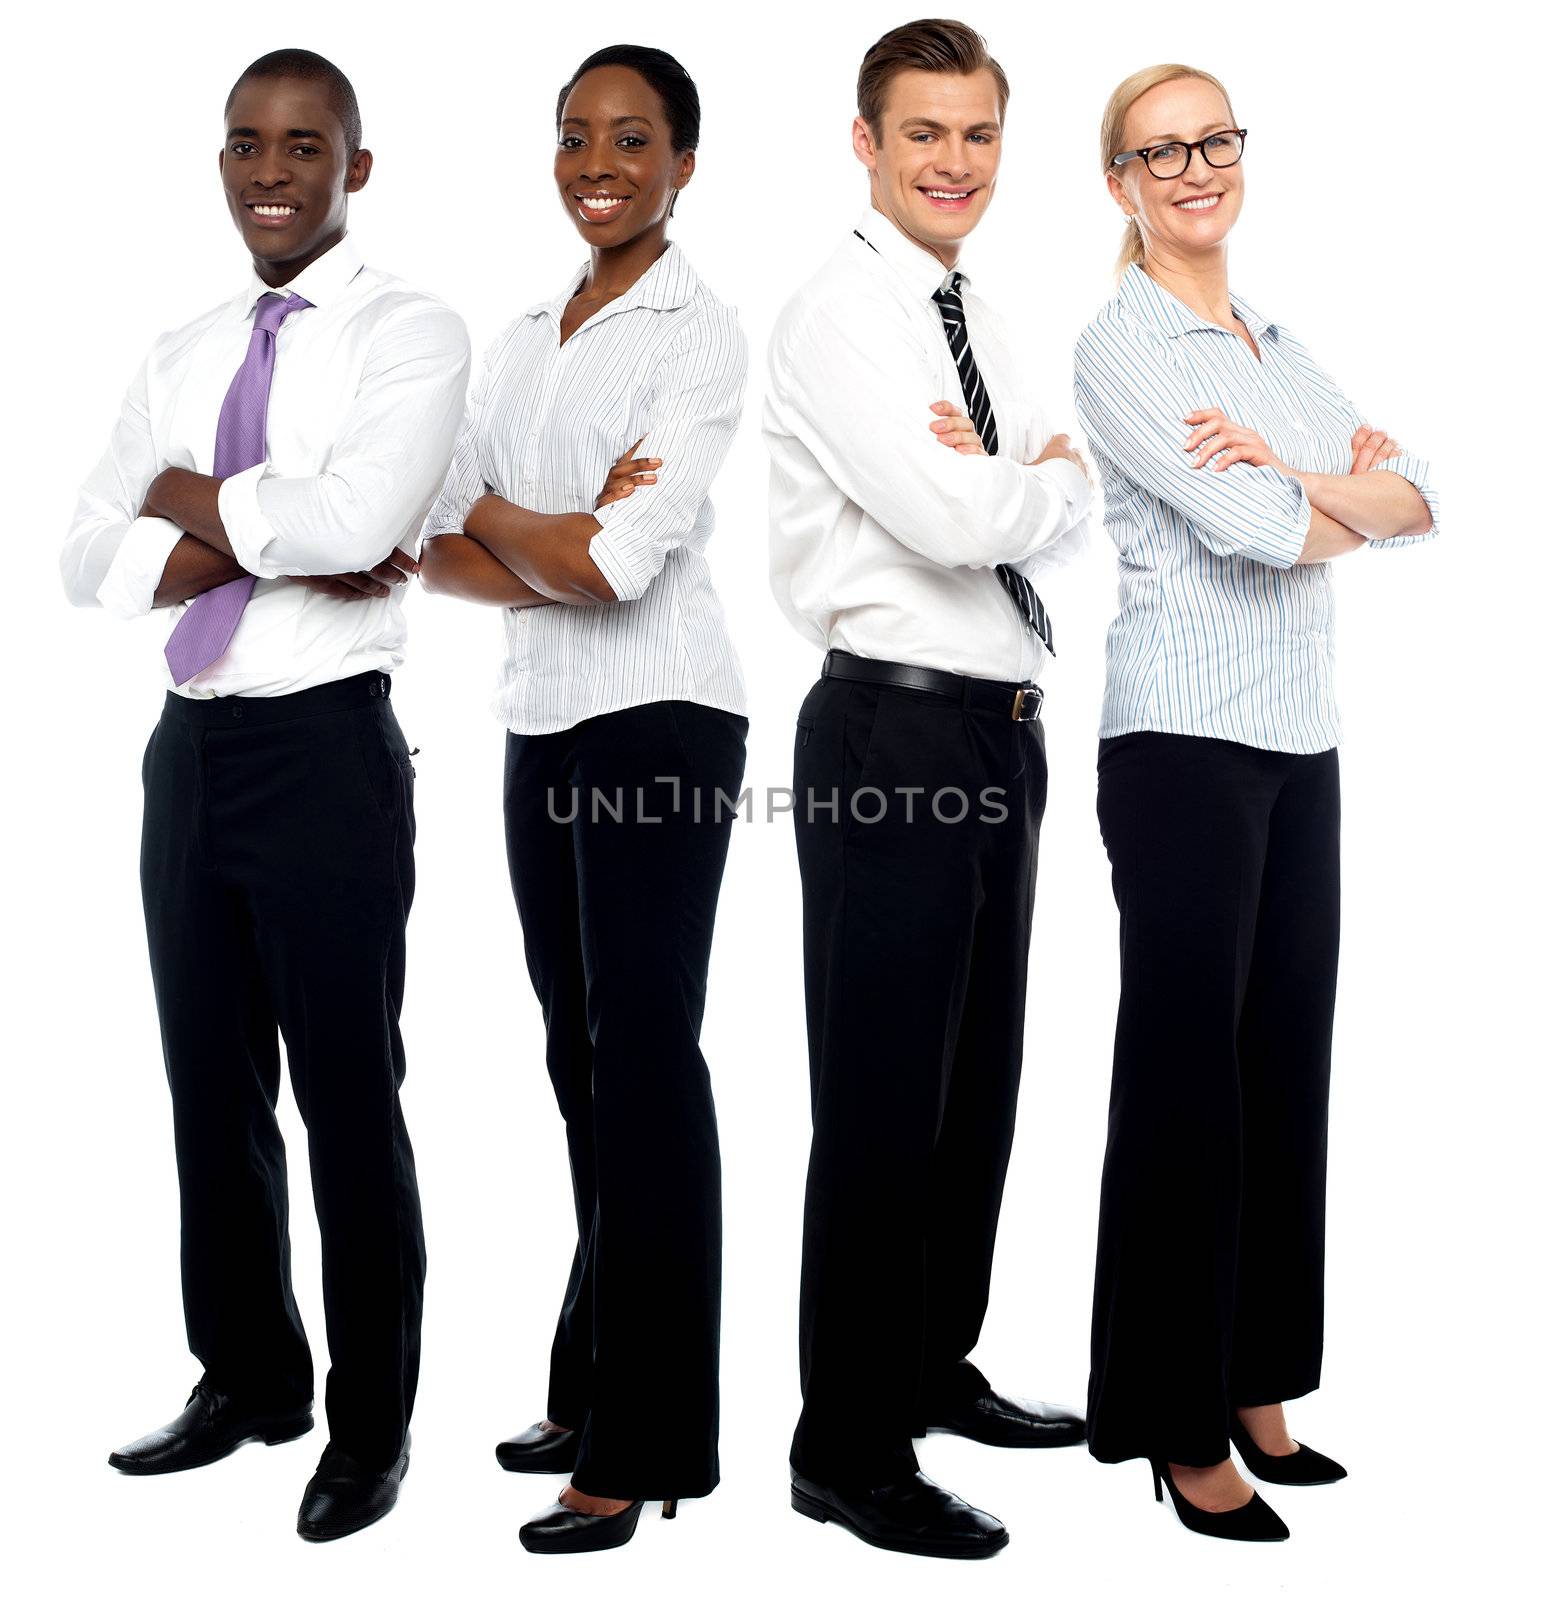 The elite business team by stockyimages